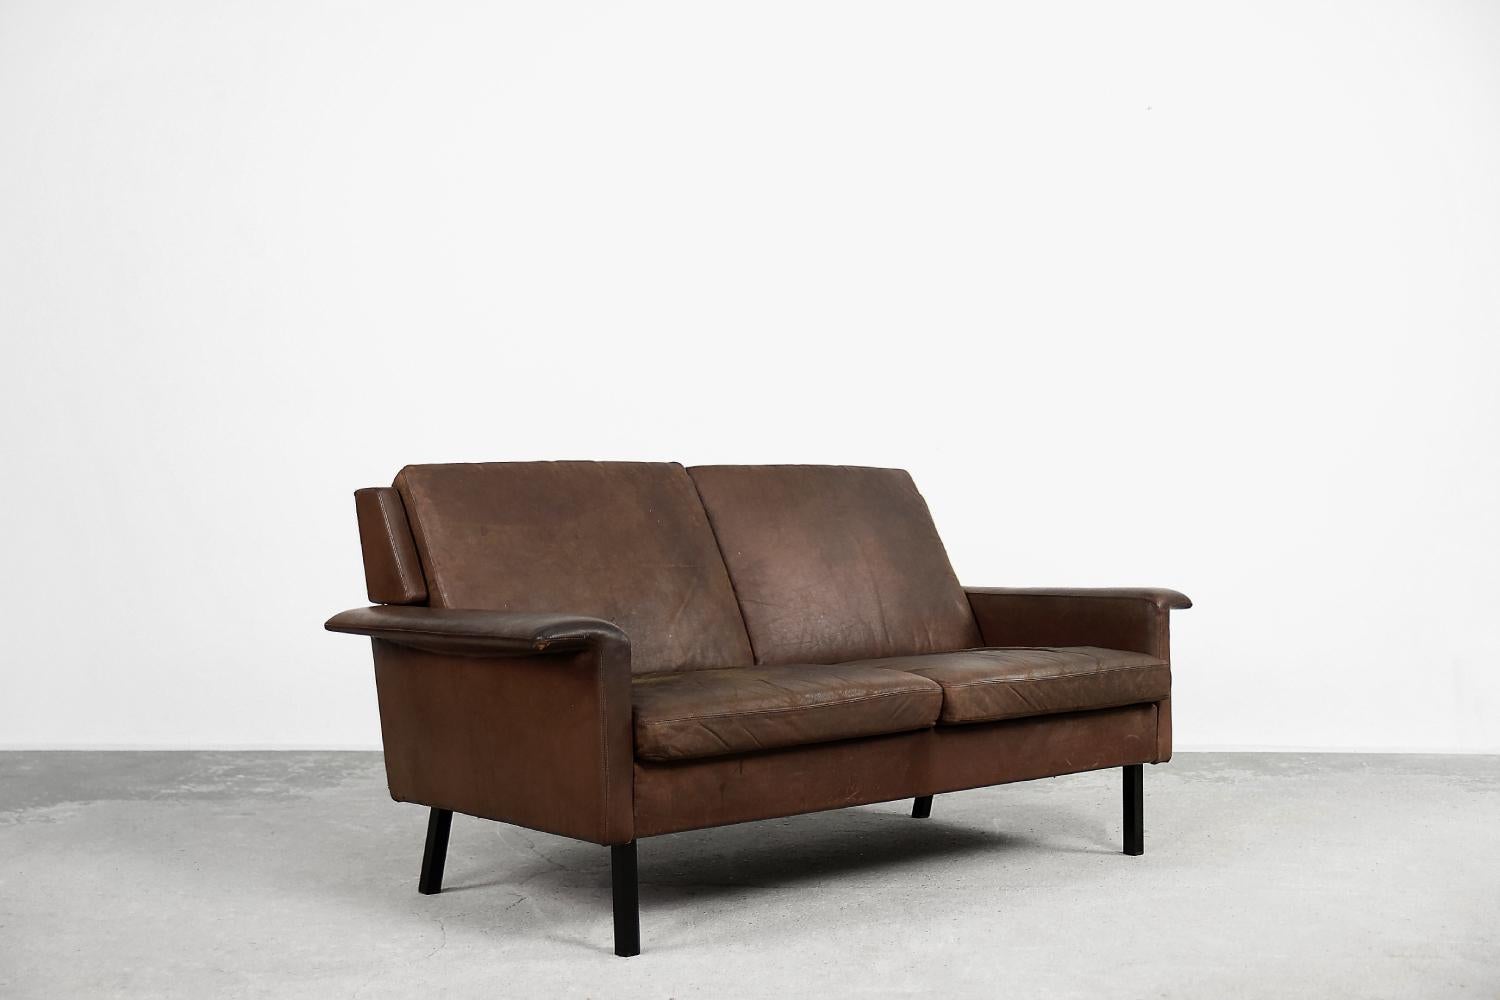 This two-seater sofa model 3330 was designed by Arne Vodder for the Danish manufacturer Fritz Hansen during the 1960s. A museum piece, rarely available for sale, especially in the two-seater version. This sofa is upholstered in high-quality amber